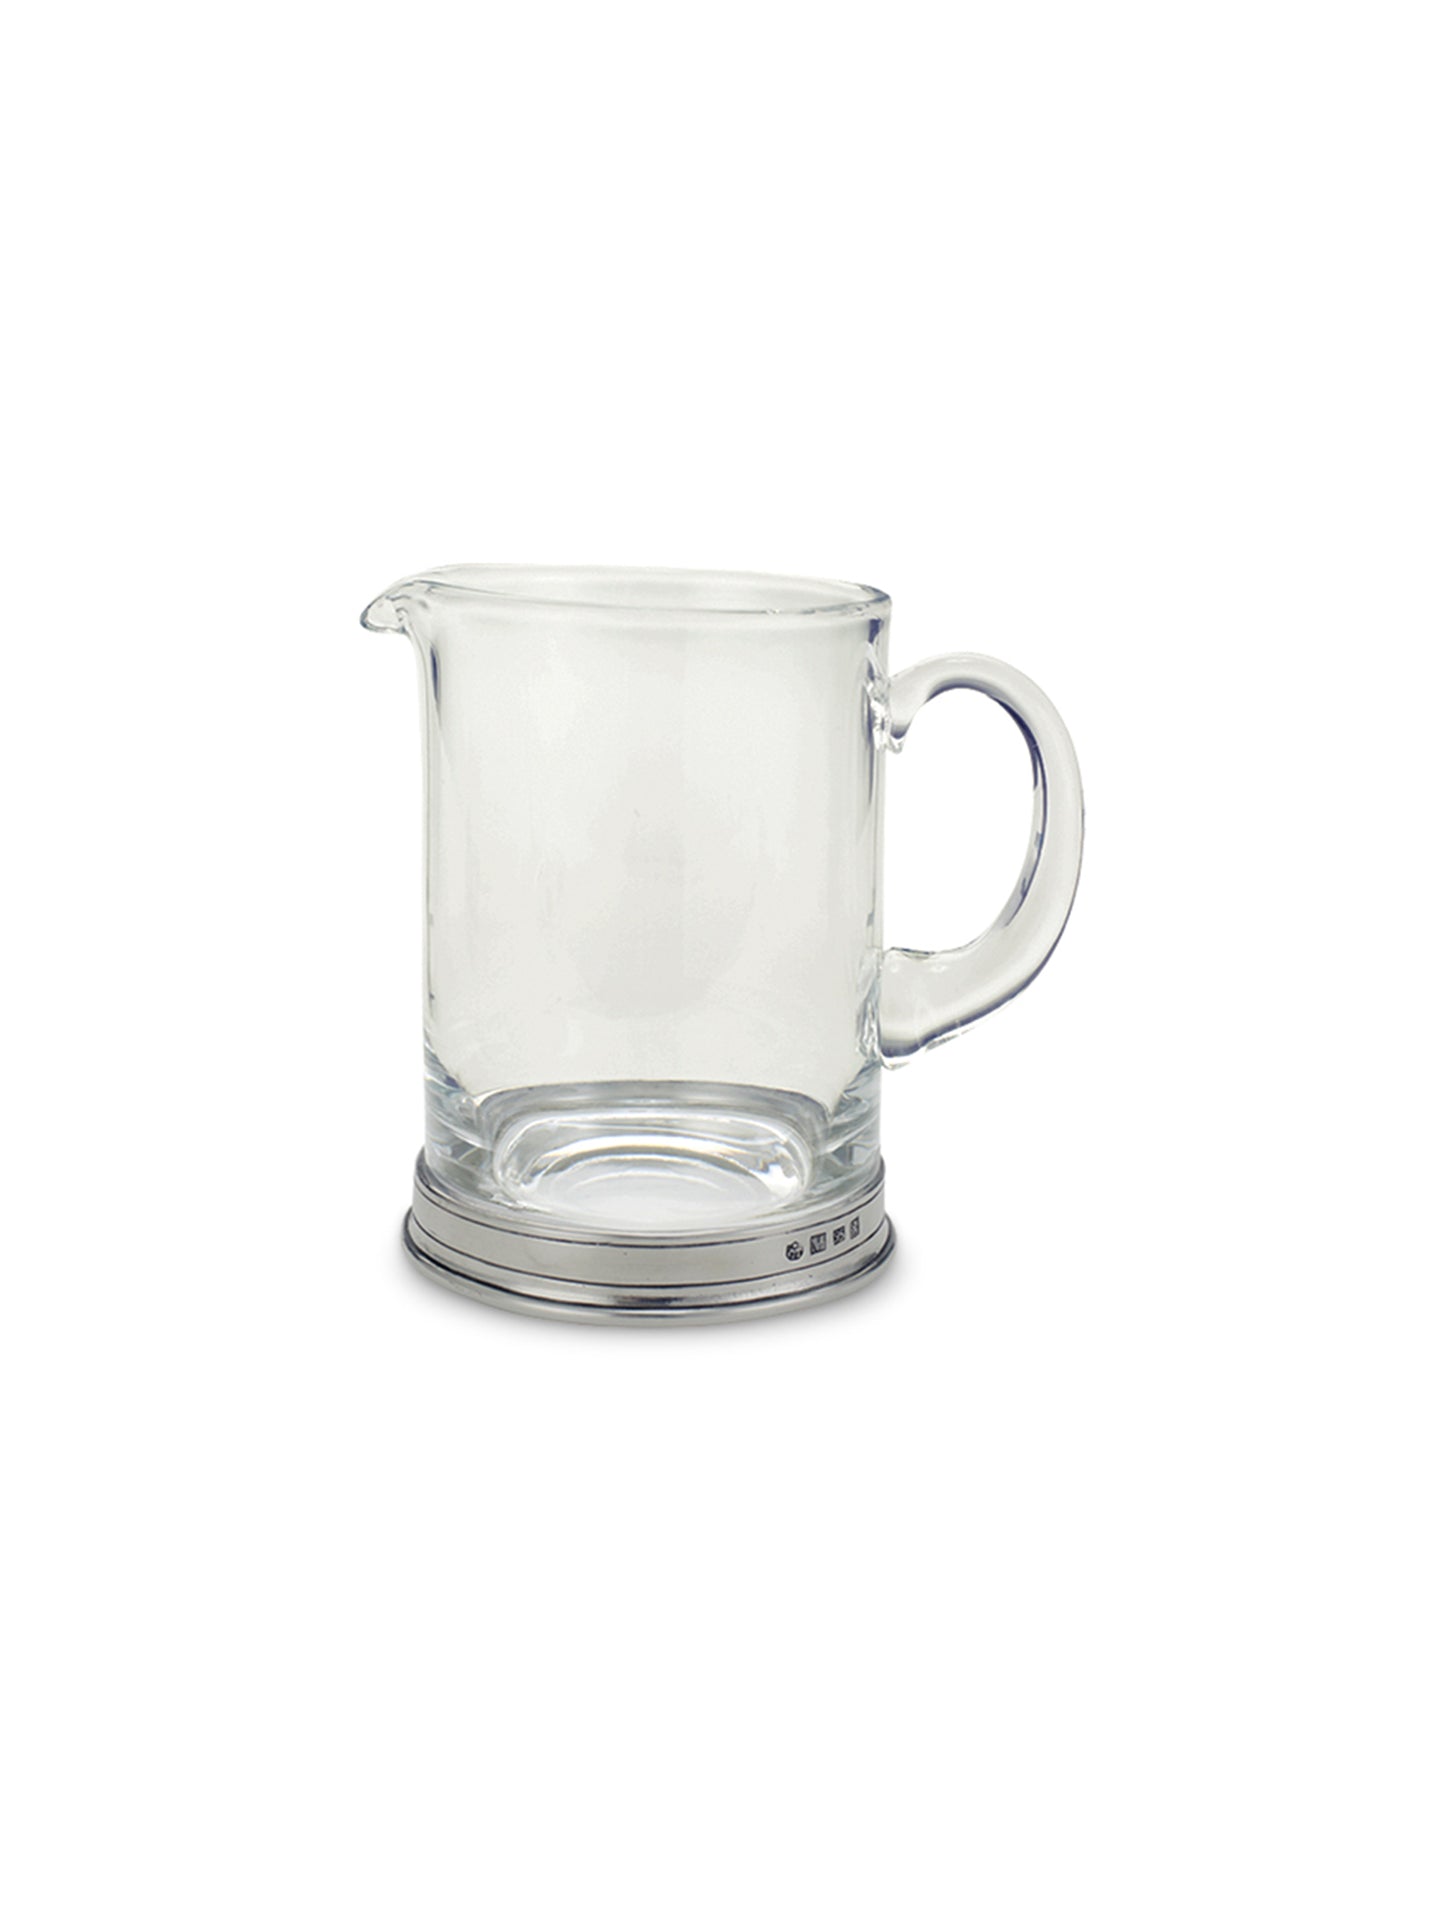 MATCH Pewter Crystal Branch Bar Pitcher Weston Table